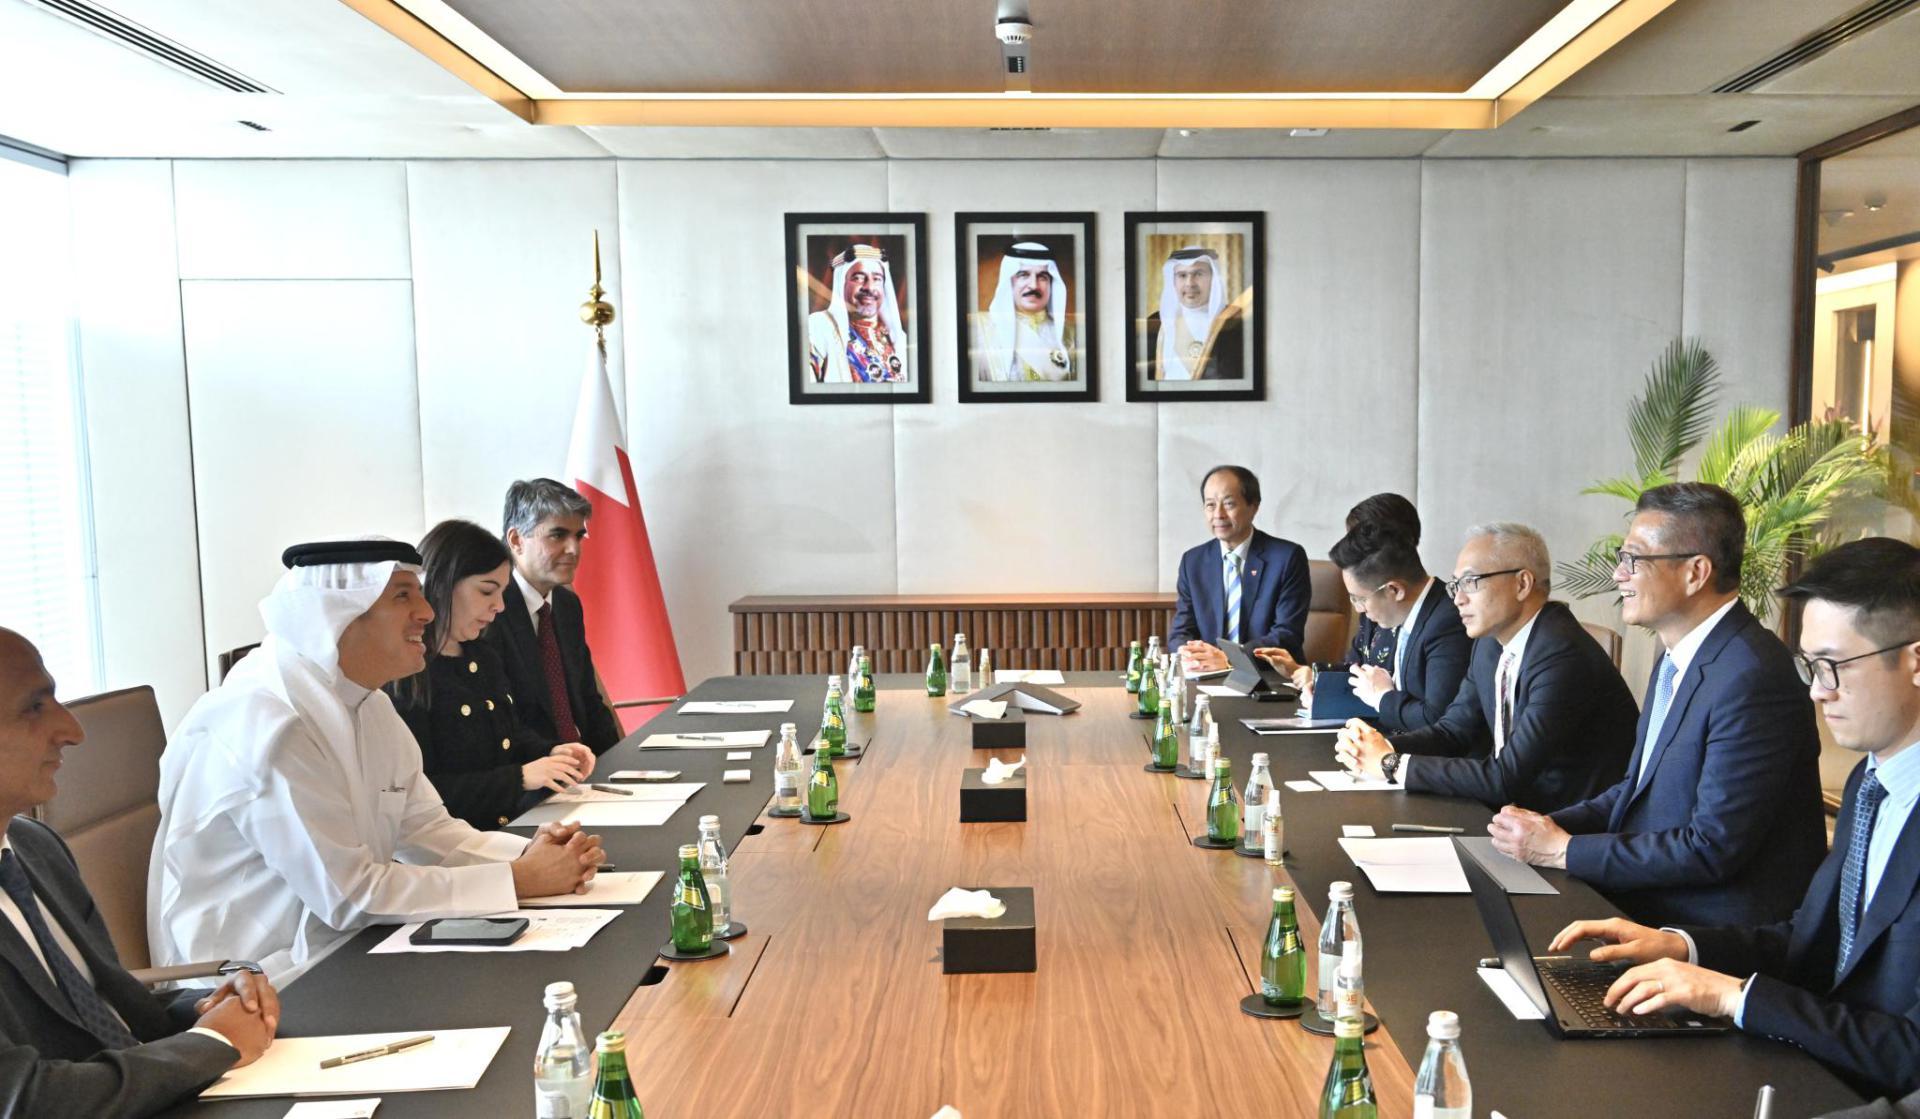 The Financial Secretary, Mr Paul Chan, continued his visit to Bahrain yesterday (October 24, Bahrain time). Photo shows Mr Chan (second right) meeting with the Chief Executive Officer of the Sovereign Wealth Fund of Bahrain, Mumtalakat, Mr Khalid Al Rumaihi (second left).